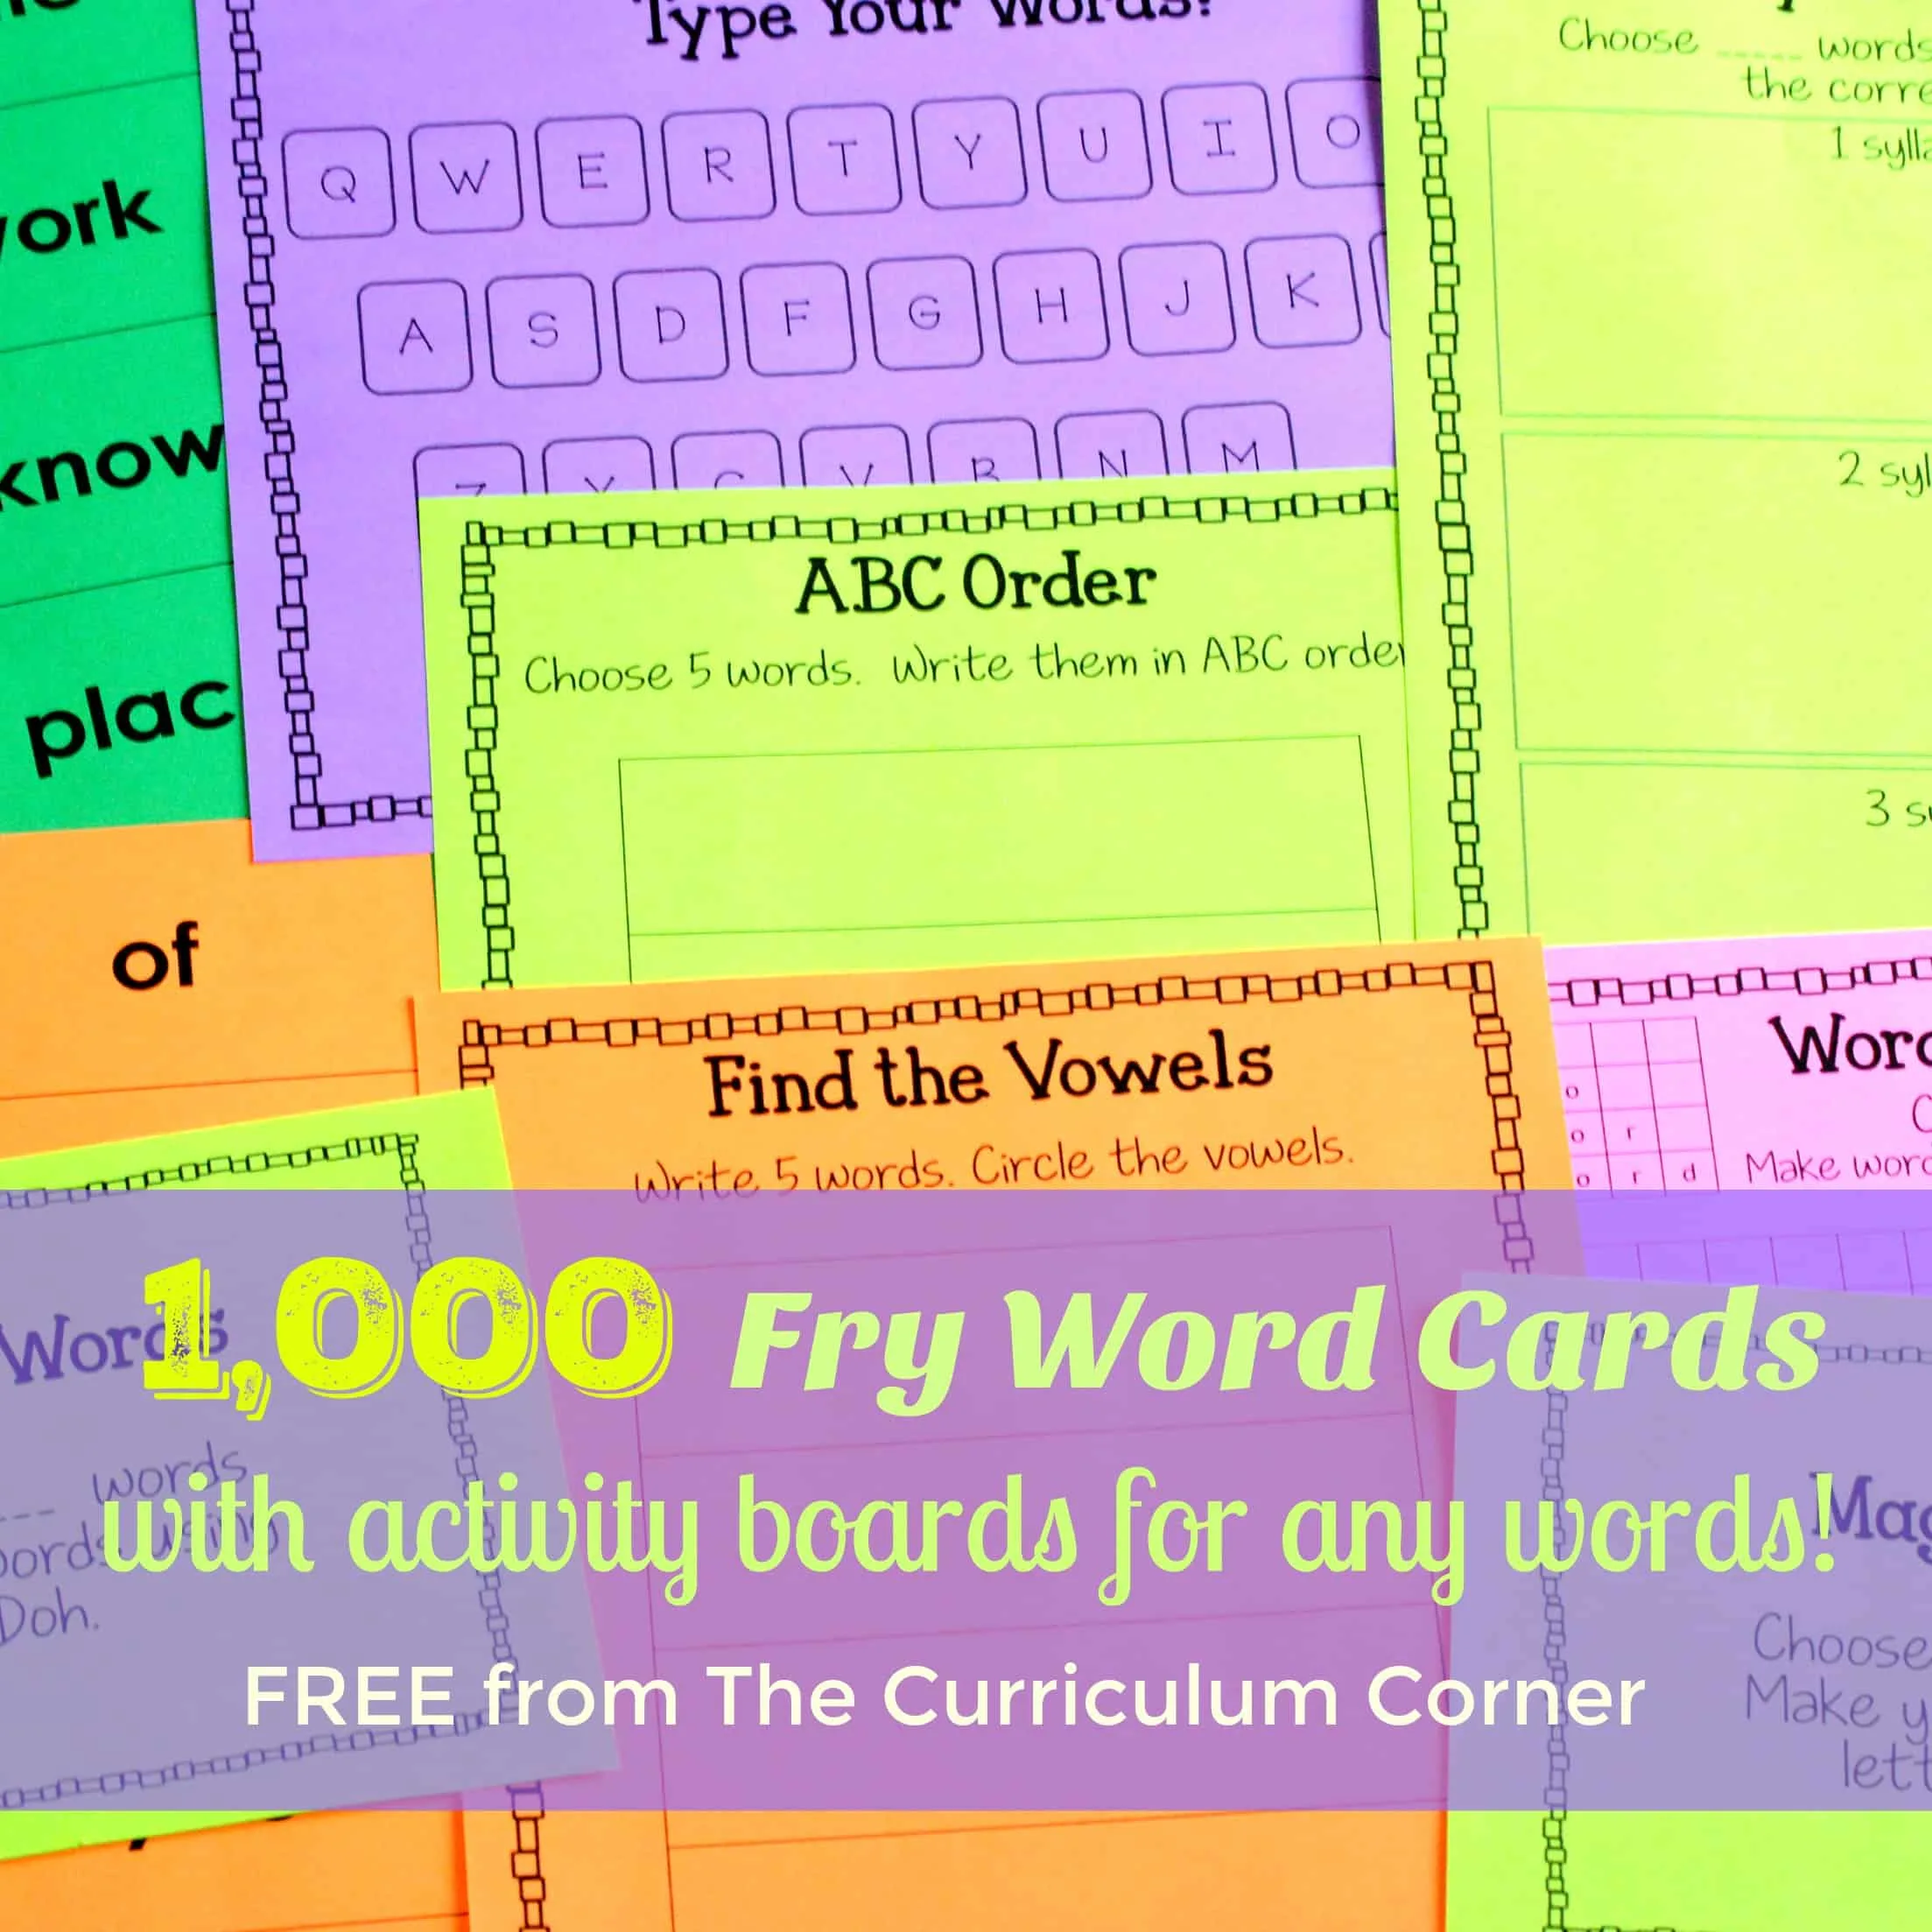 FREEBIE! 1,000 Fry Word Cards + Activity Boards for any word set | The Curriculum Corner